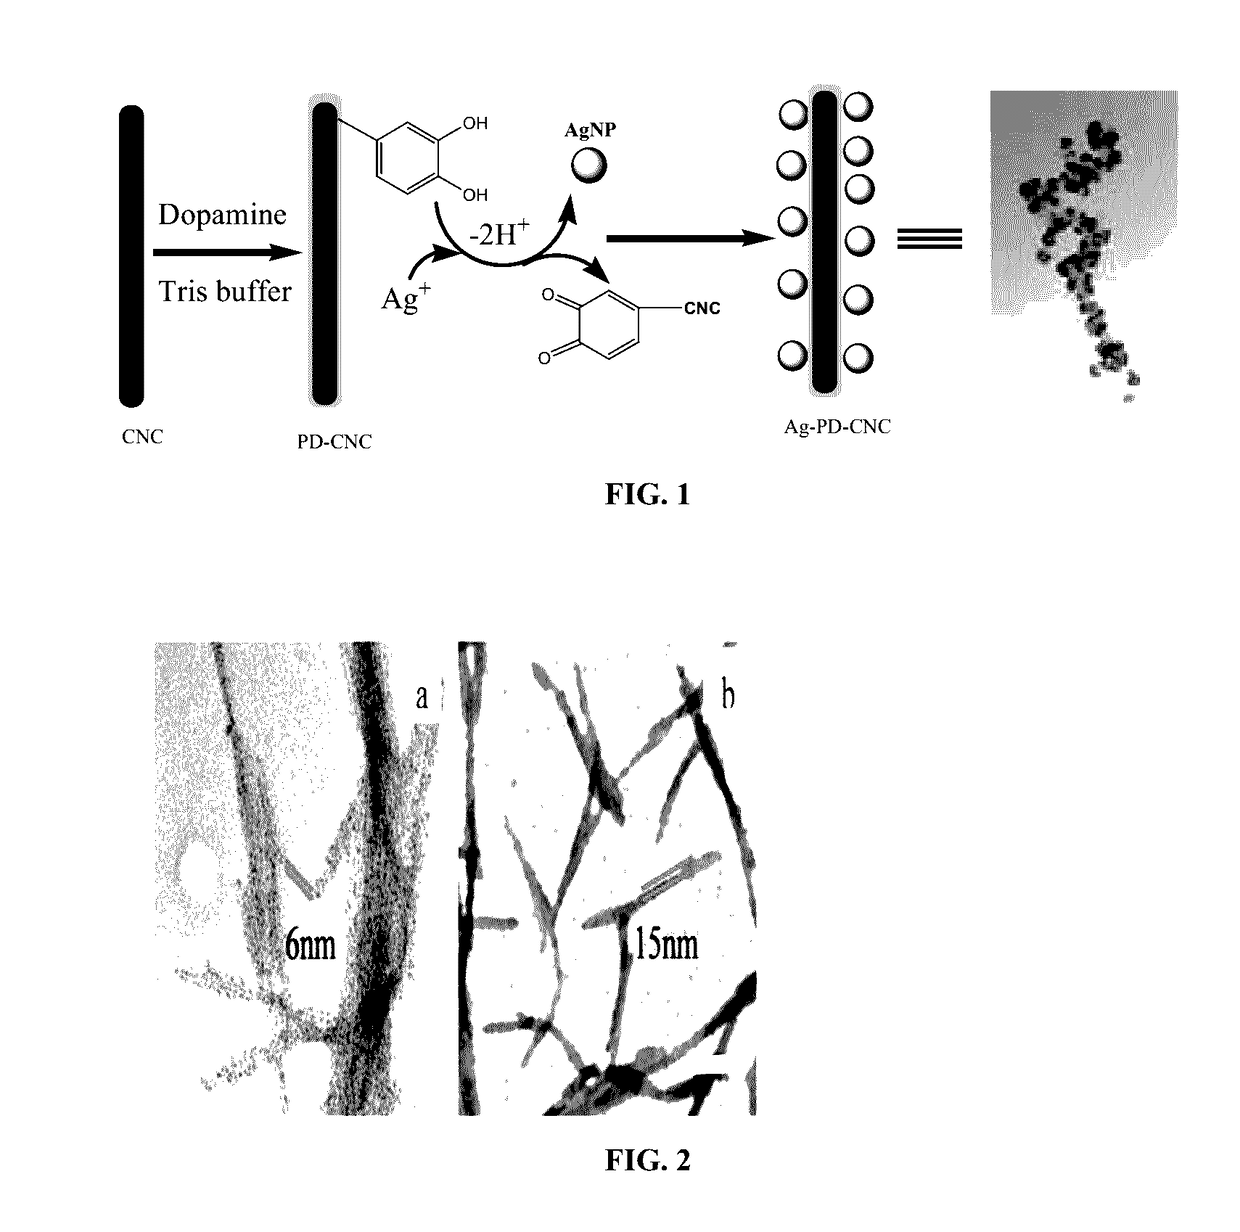 Polydopamine functionalized cellulose nanocrystals (pd-cncs) and uses thereof